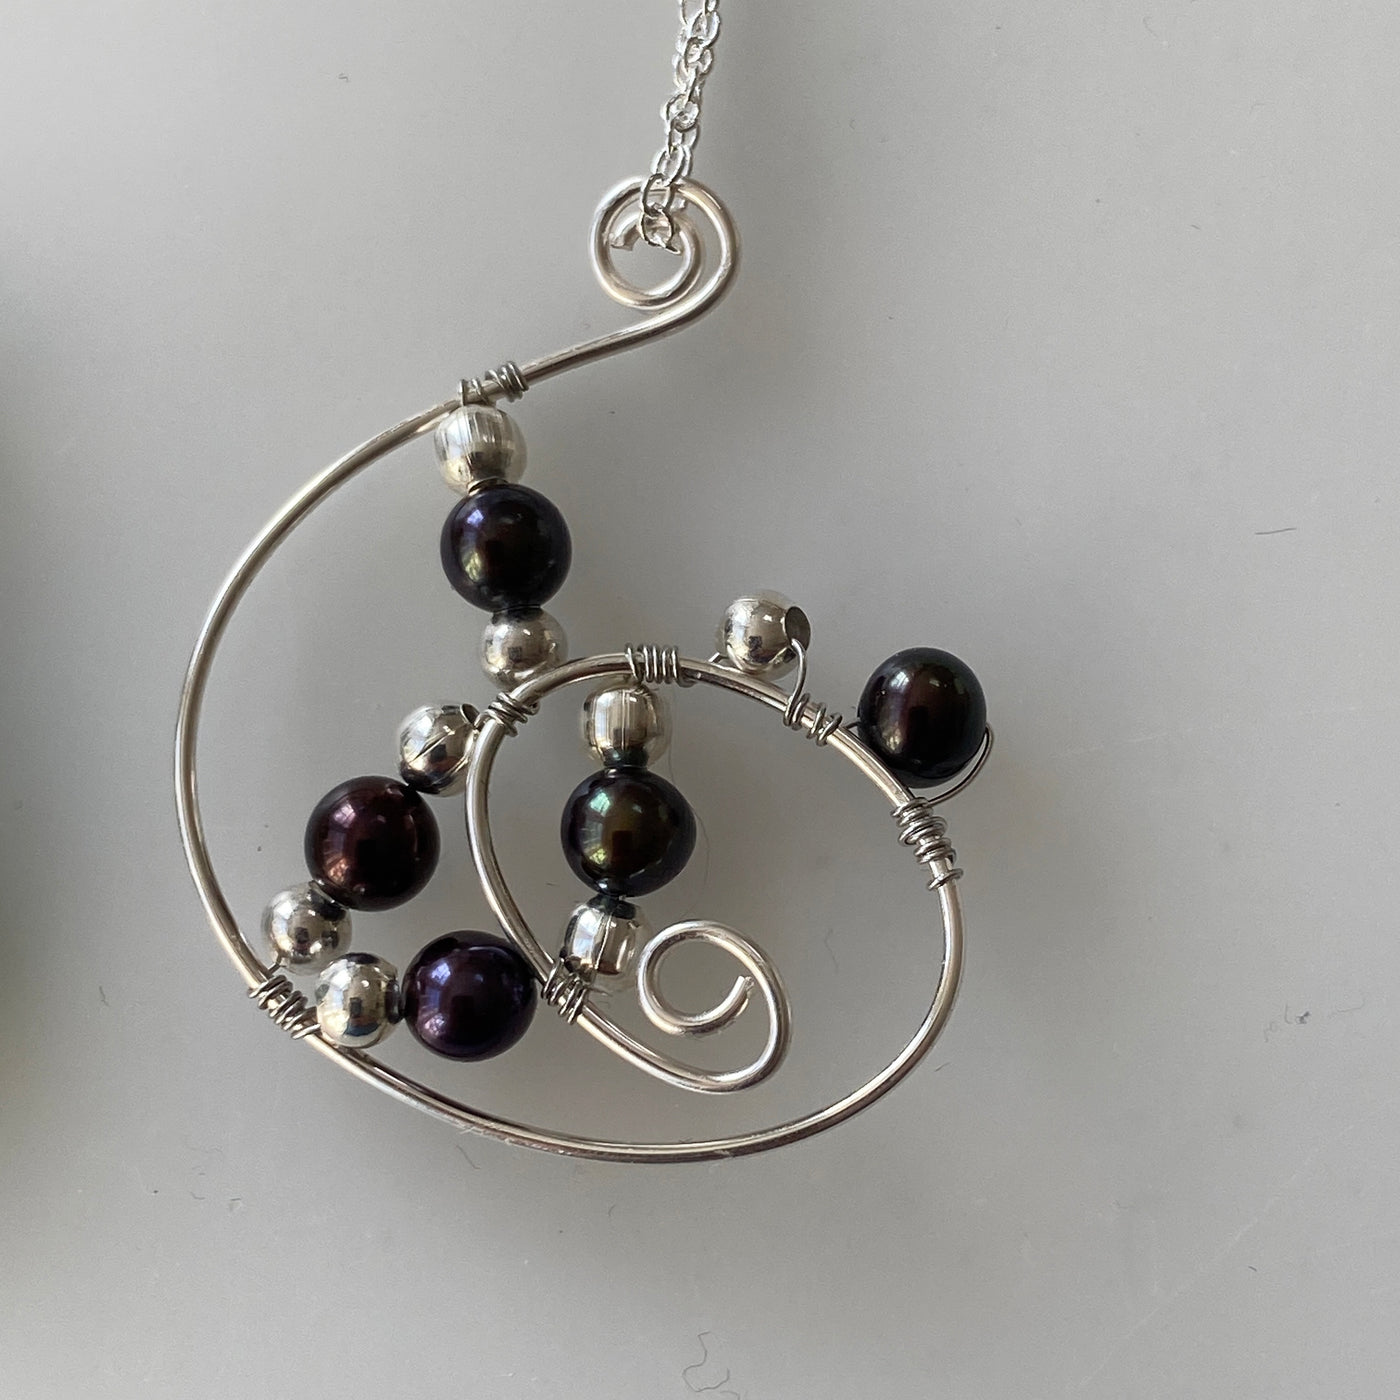 Pendant curly with pearls raven wings 5 -5.5 mm and silver